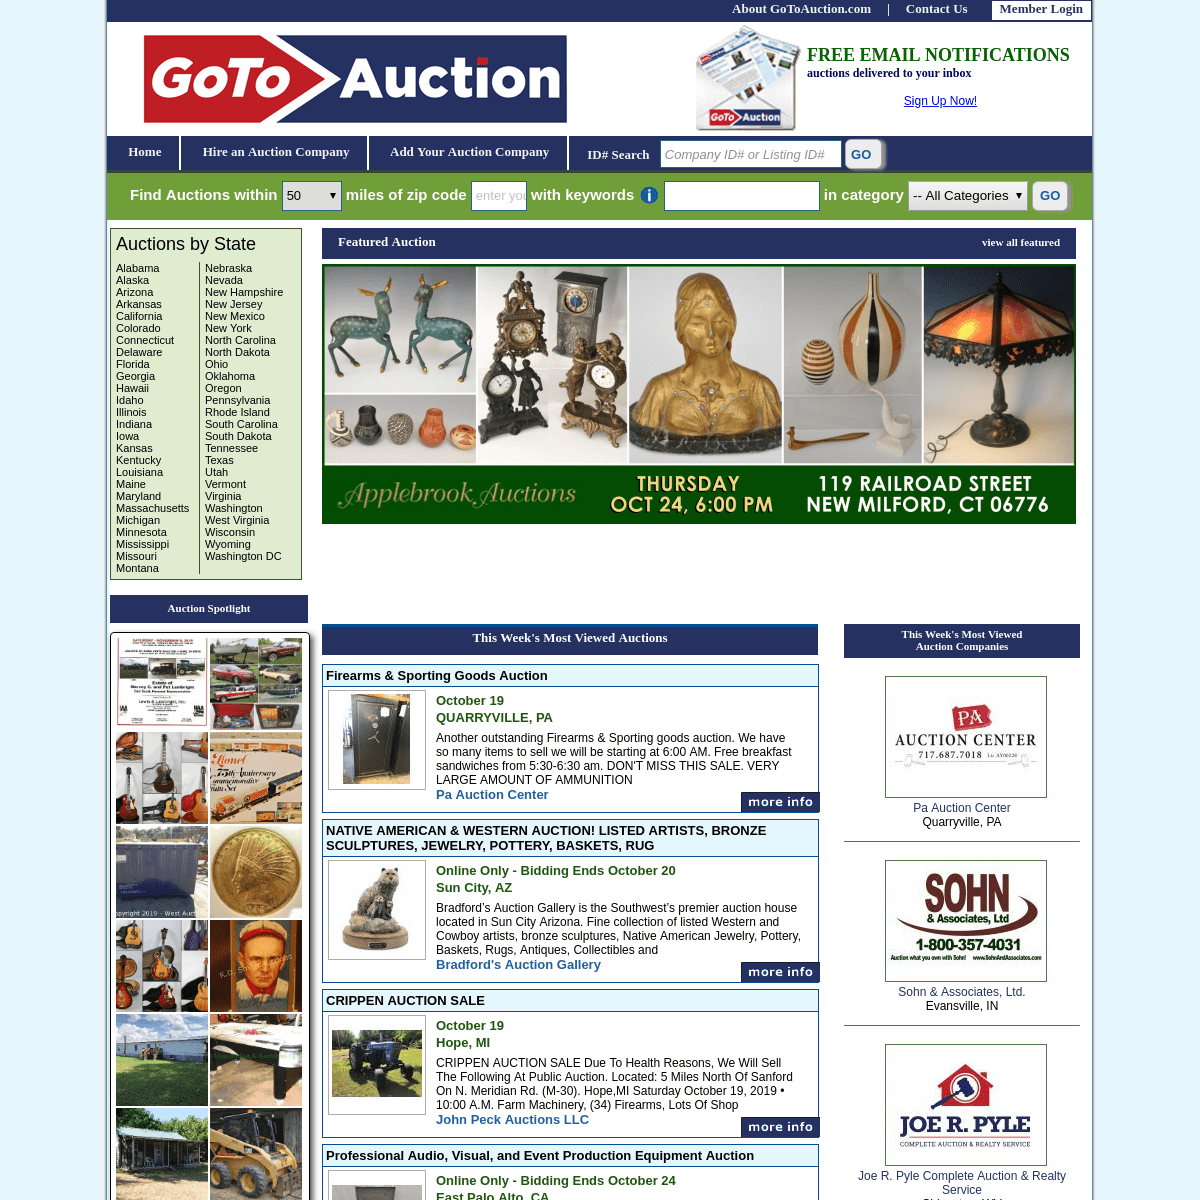 A complete backup of gotoauction.com